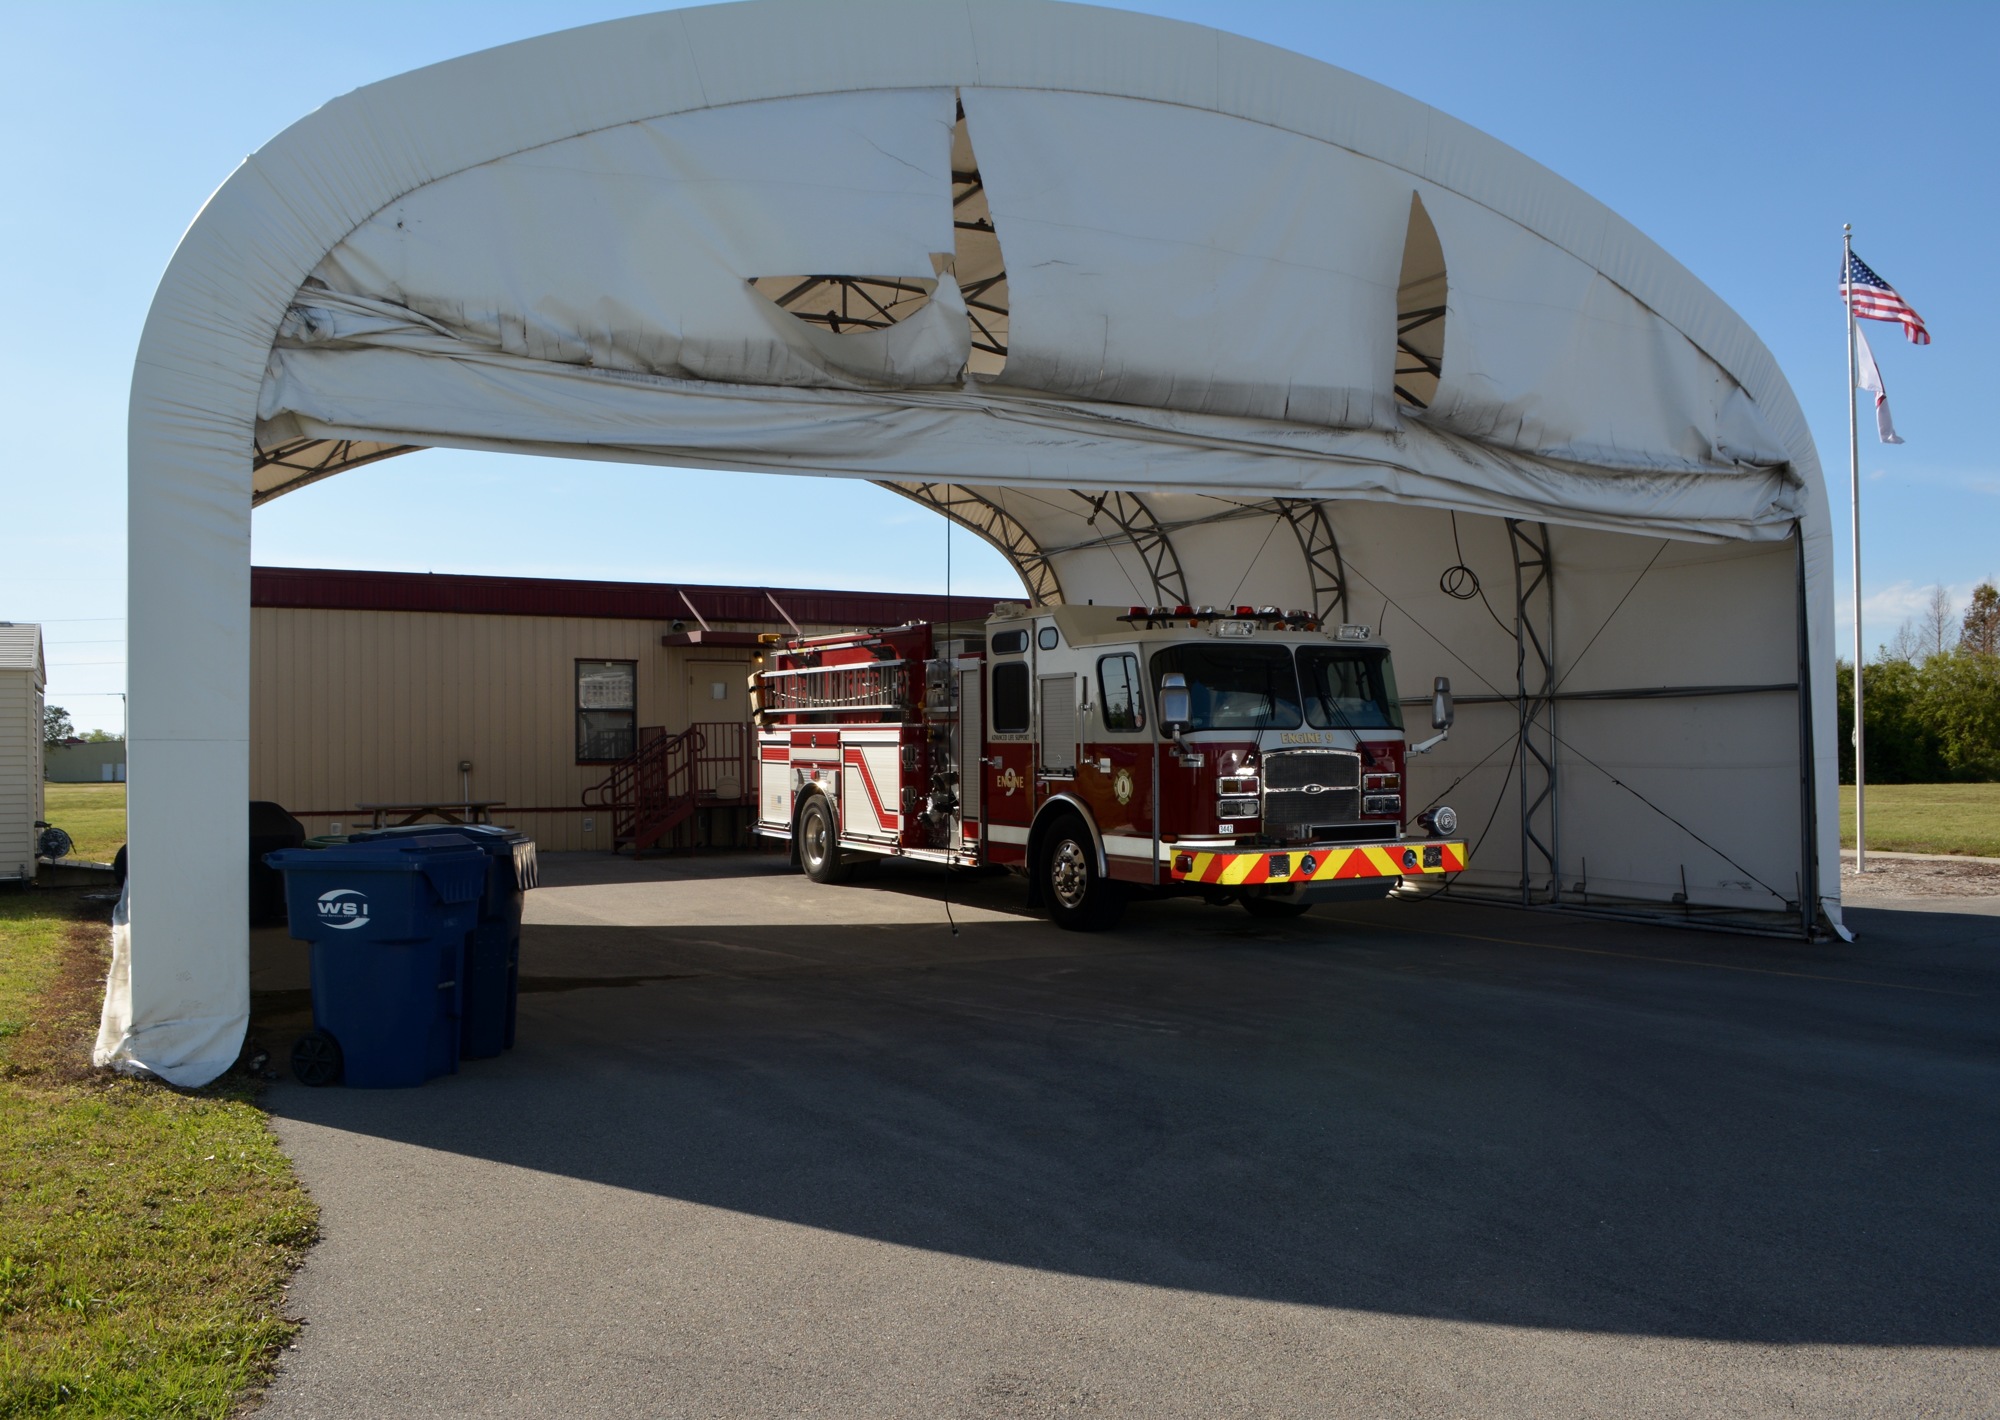 The station on Apex Road is currently comprised of a large white tent and metal portable building.